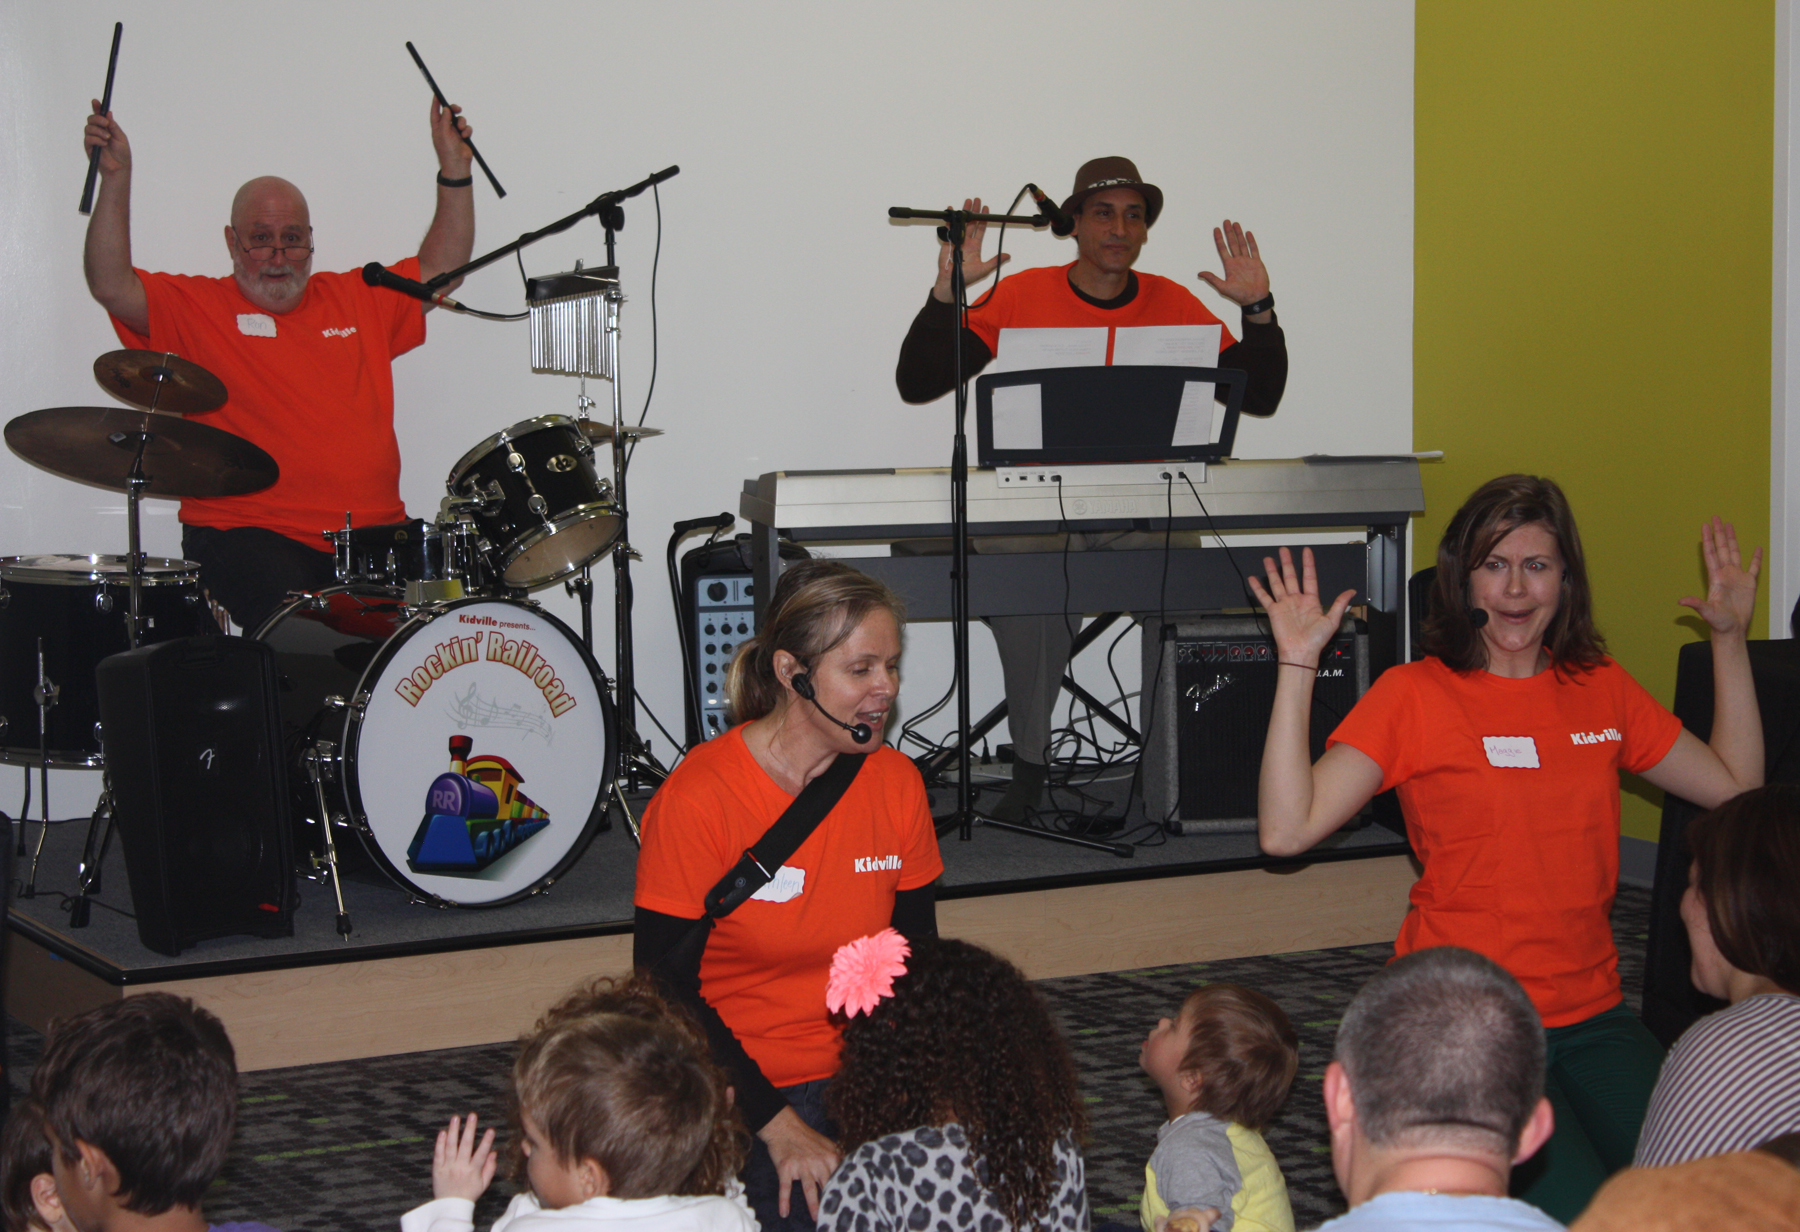 Kidville’s signature Rockin’ Railroad band brought down the house during Grand Opening weekend performances. The children’s band performed three live shows daily, taking children on an exciting journe